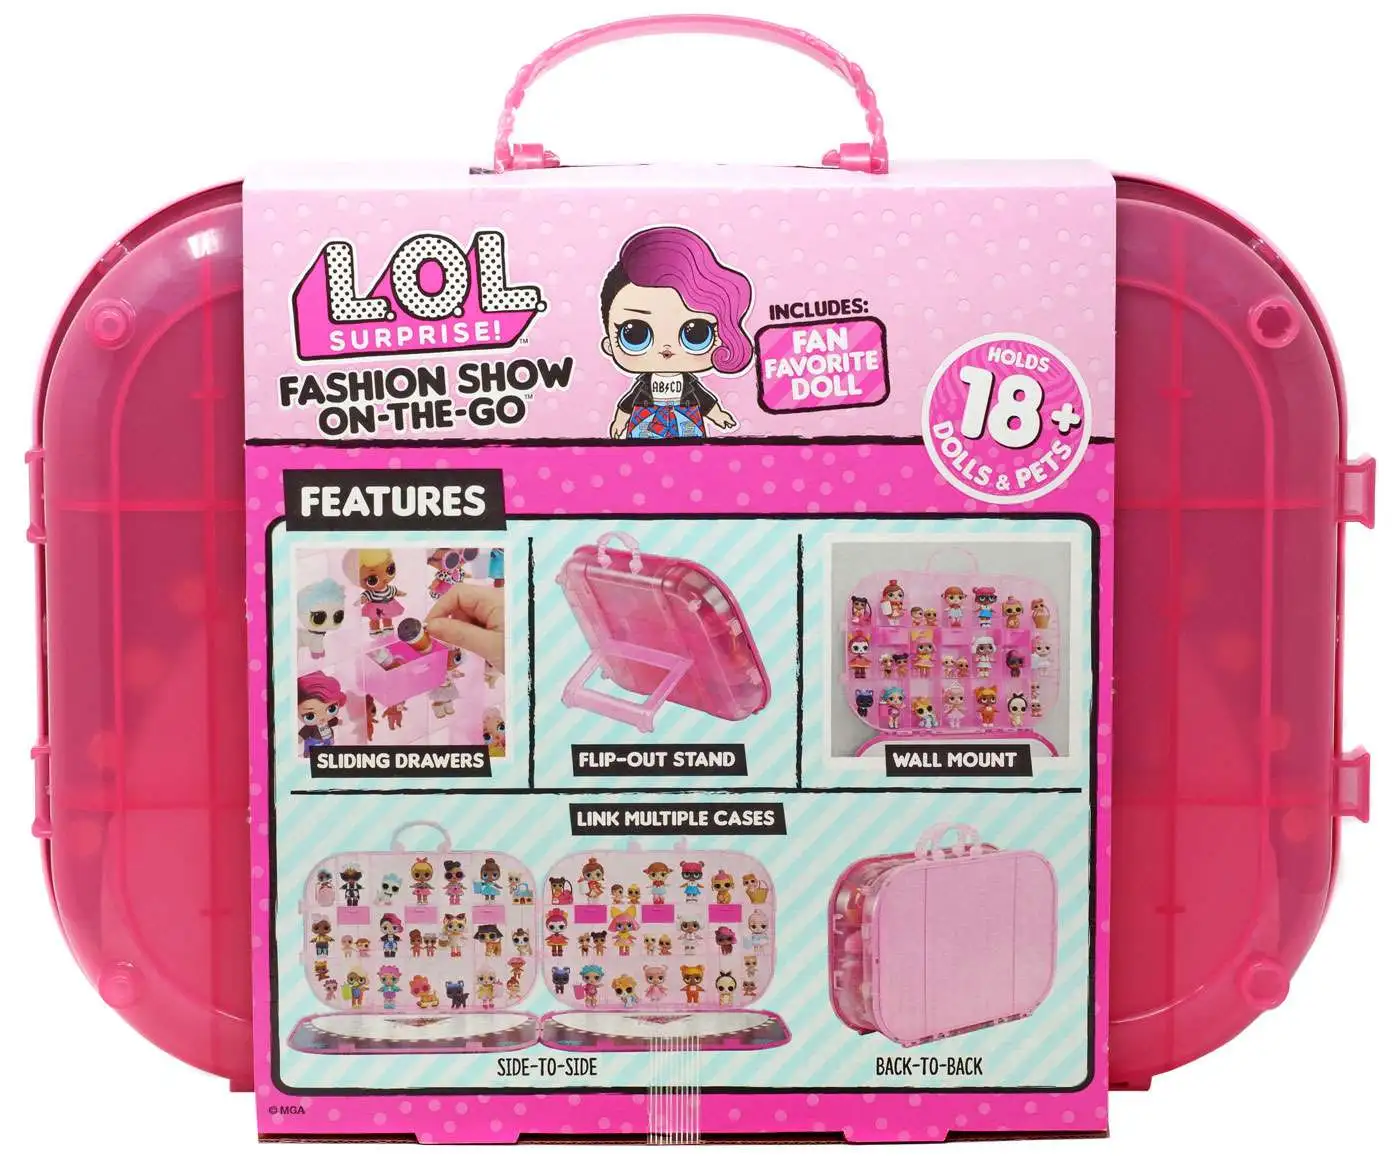 Surprise Fashion Show On-The-Go Light Pink Storage & Playset L.O.L 